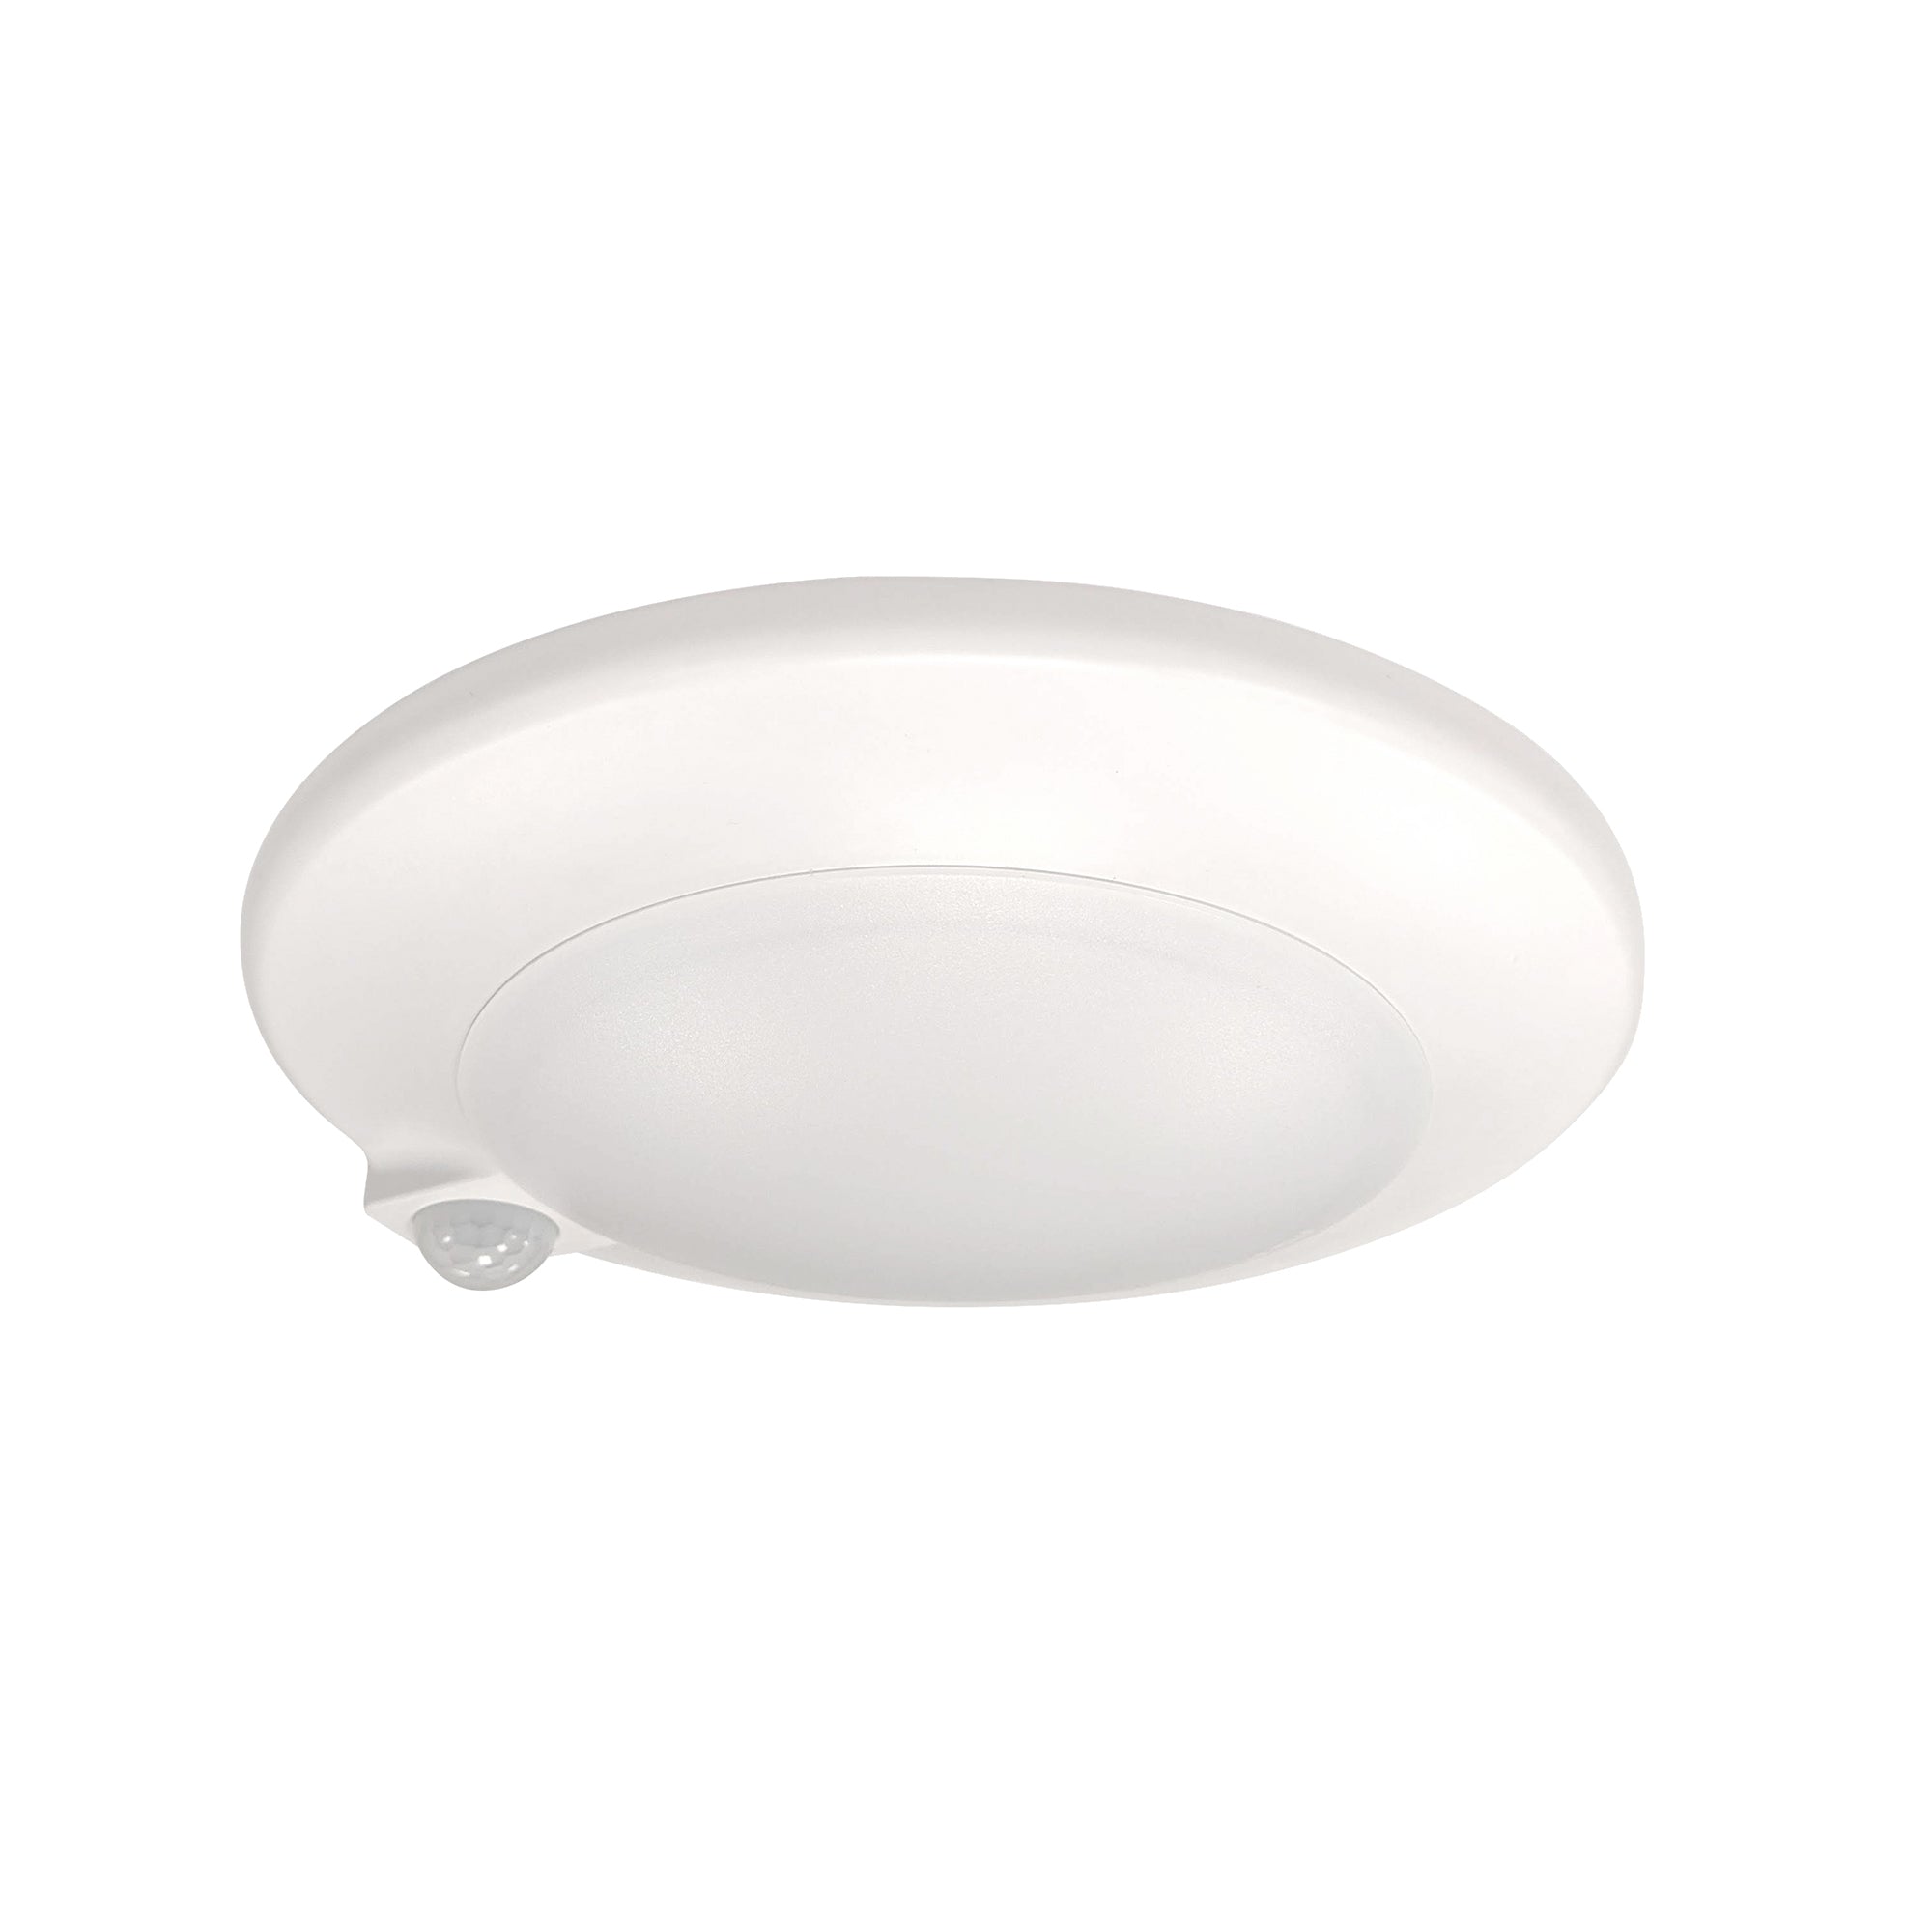 Nora Lighting LE44 - NLOPAC-R7MS40W - Surface - White